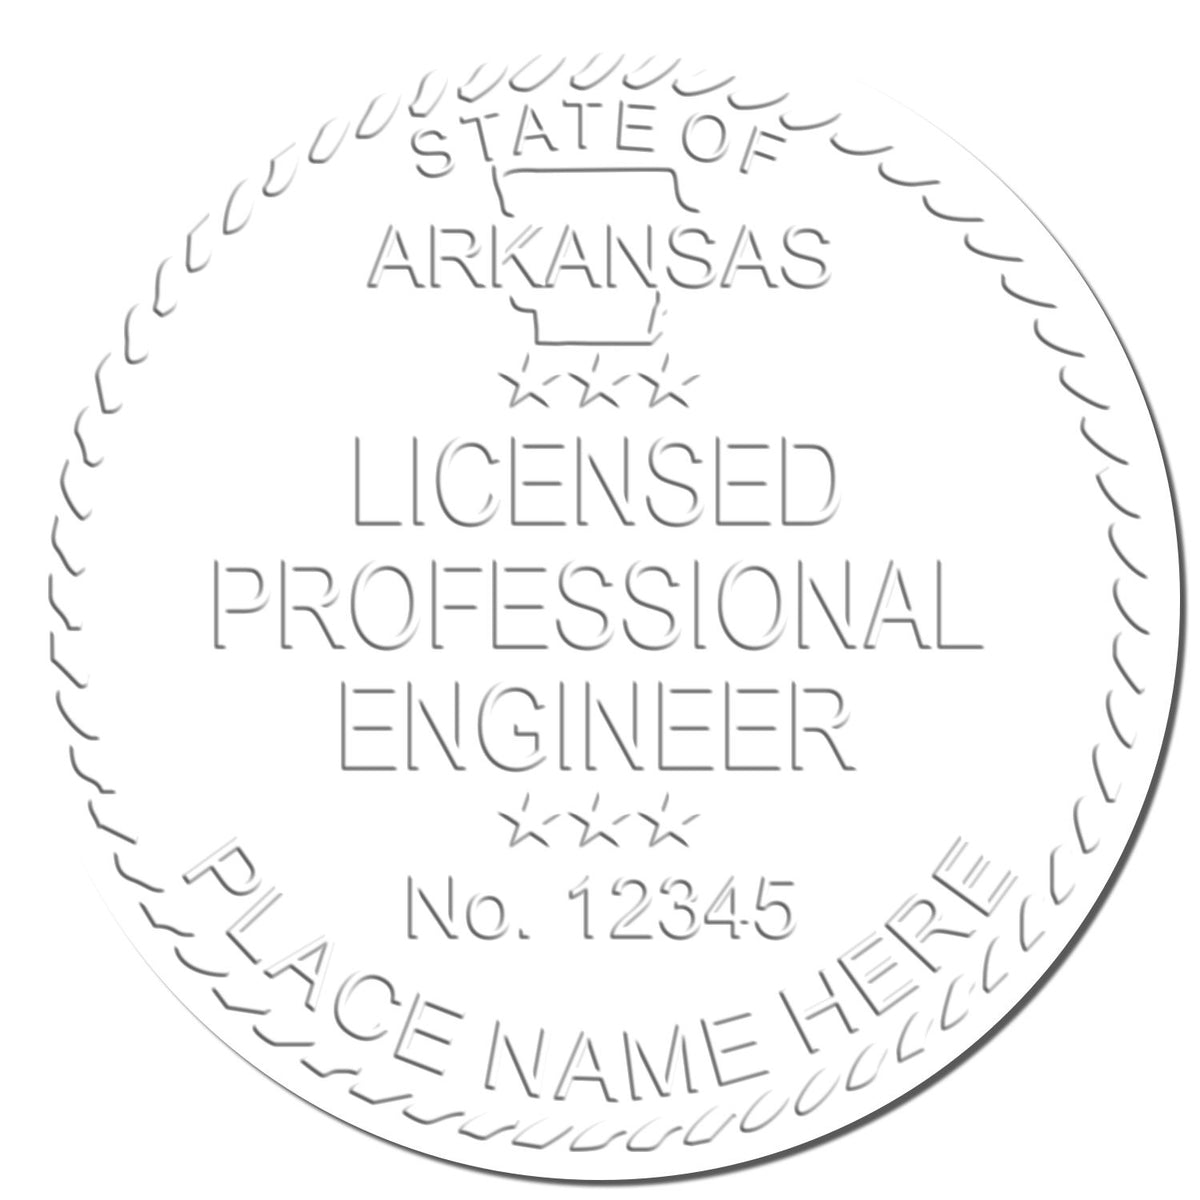 This paper is stamped with a sample imprint of the Hybrid Arkansas Engineer Seal, signifying its quality and reliability.